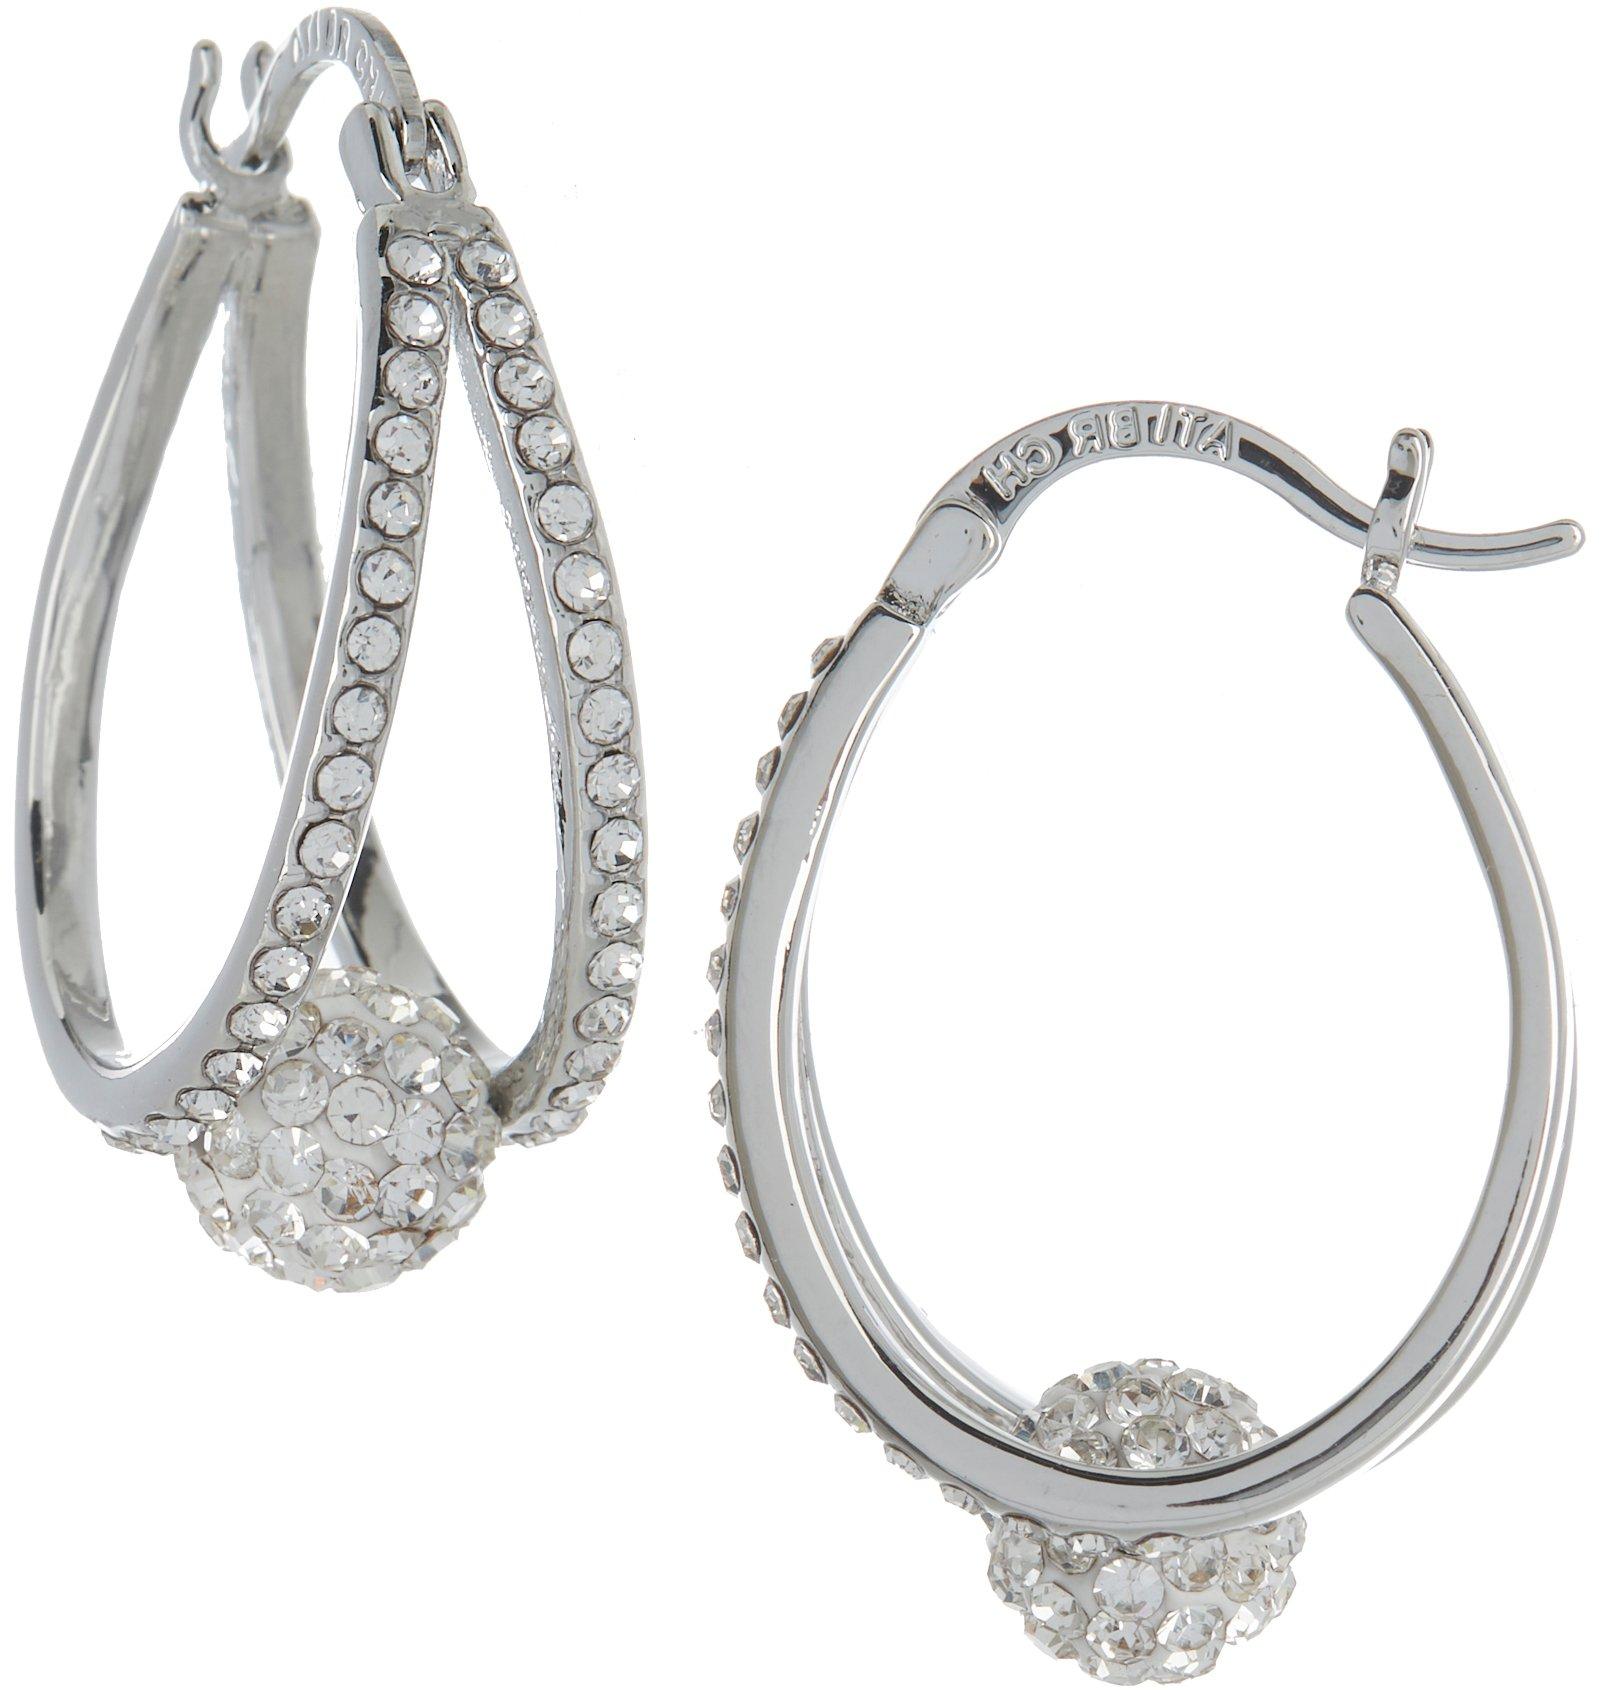 Piper & Taylor Pave Fireball Double Hoop Earrings